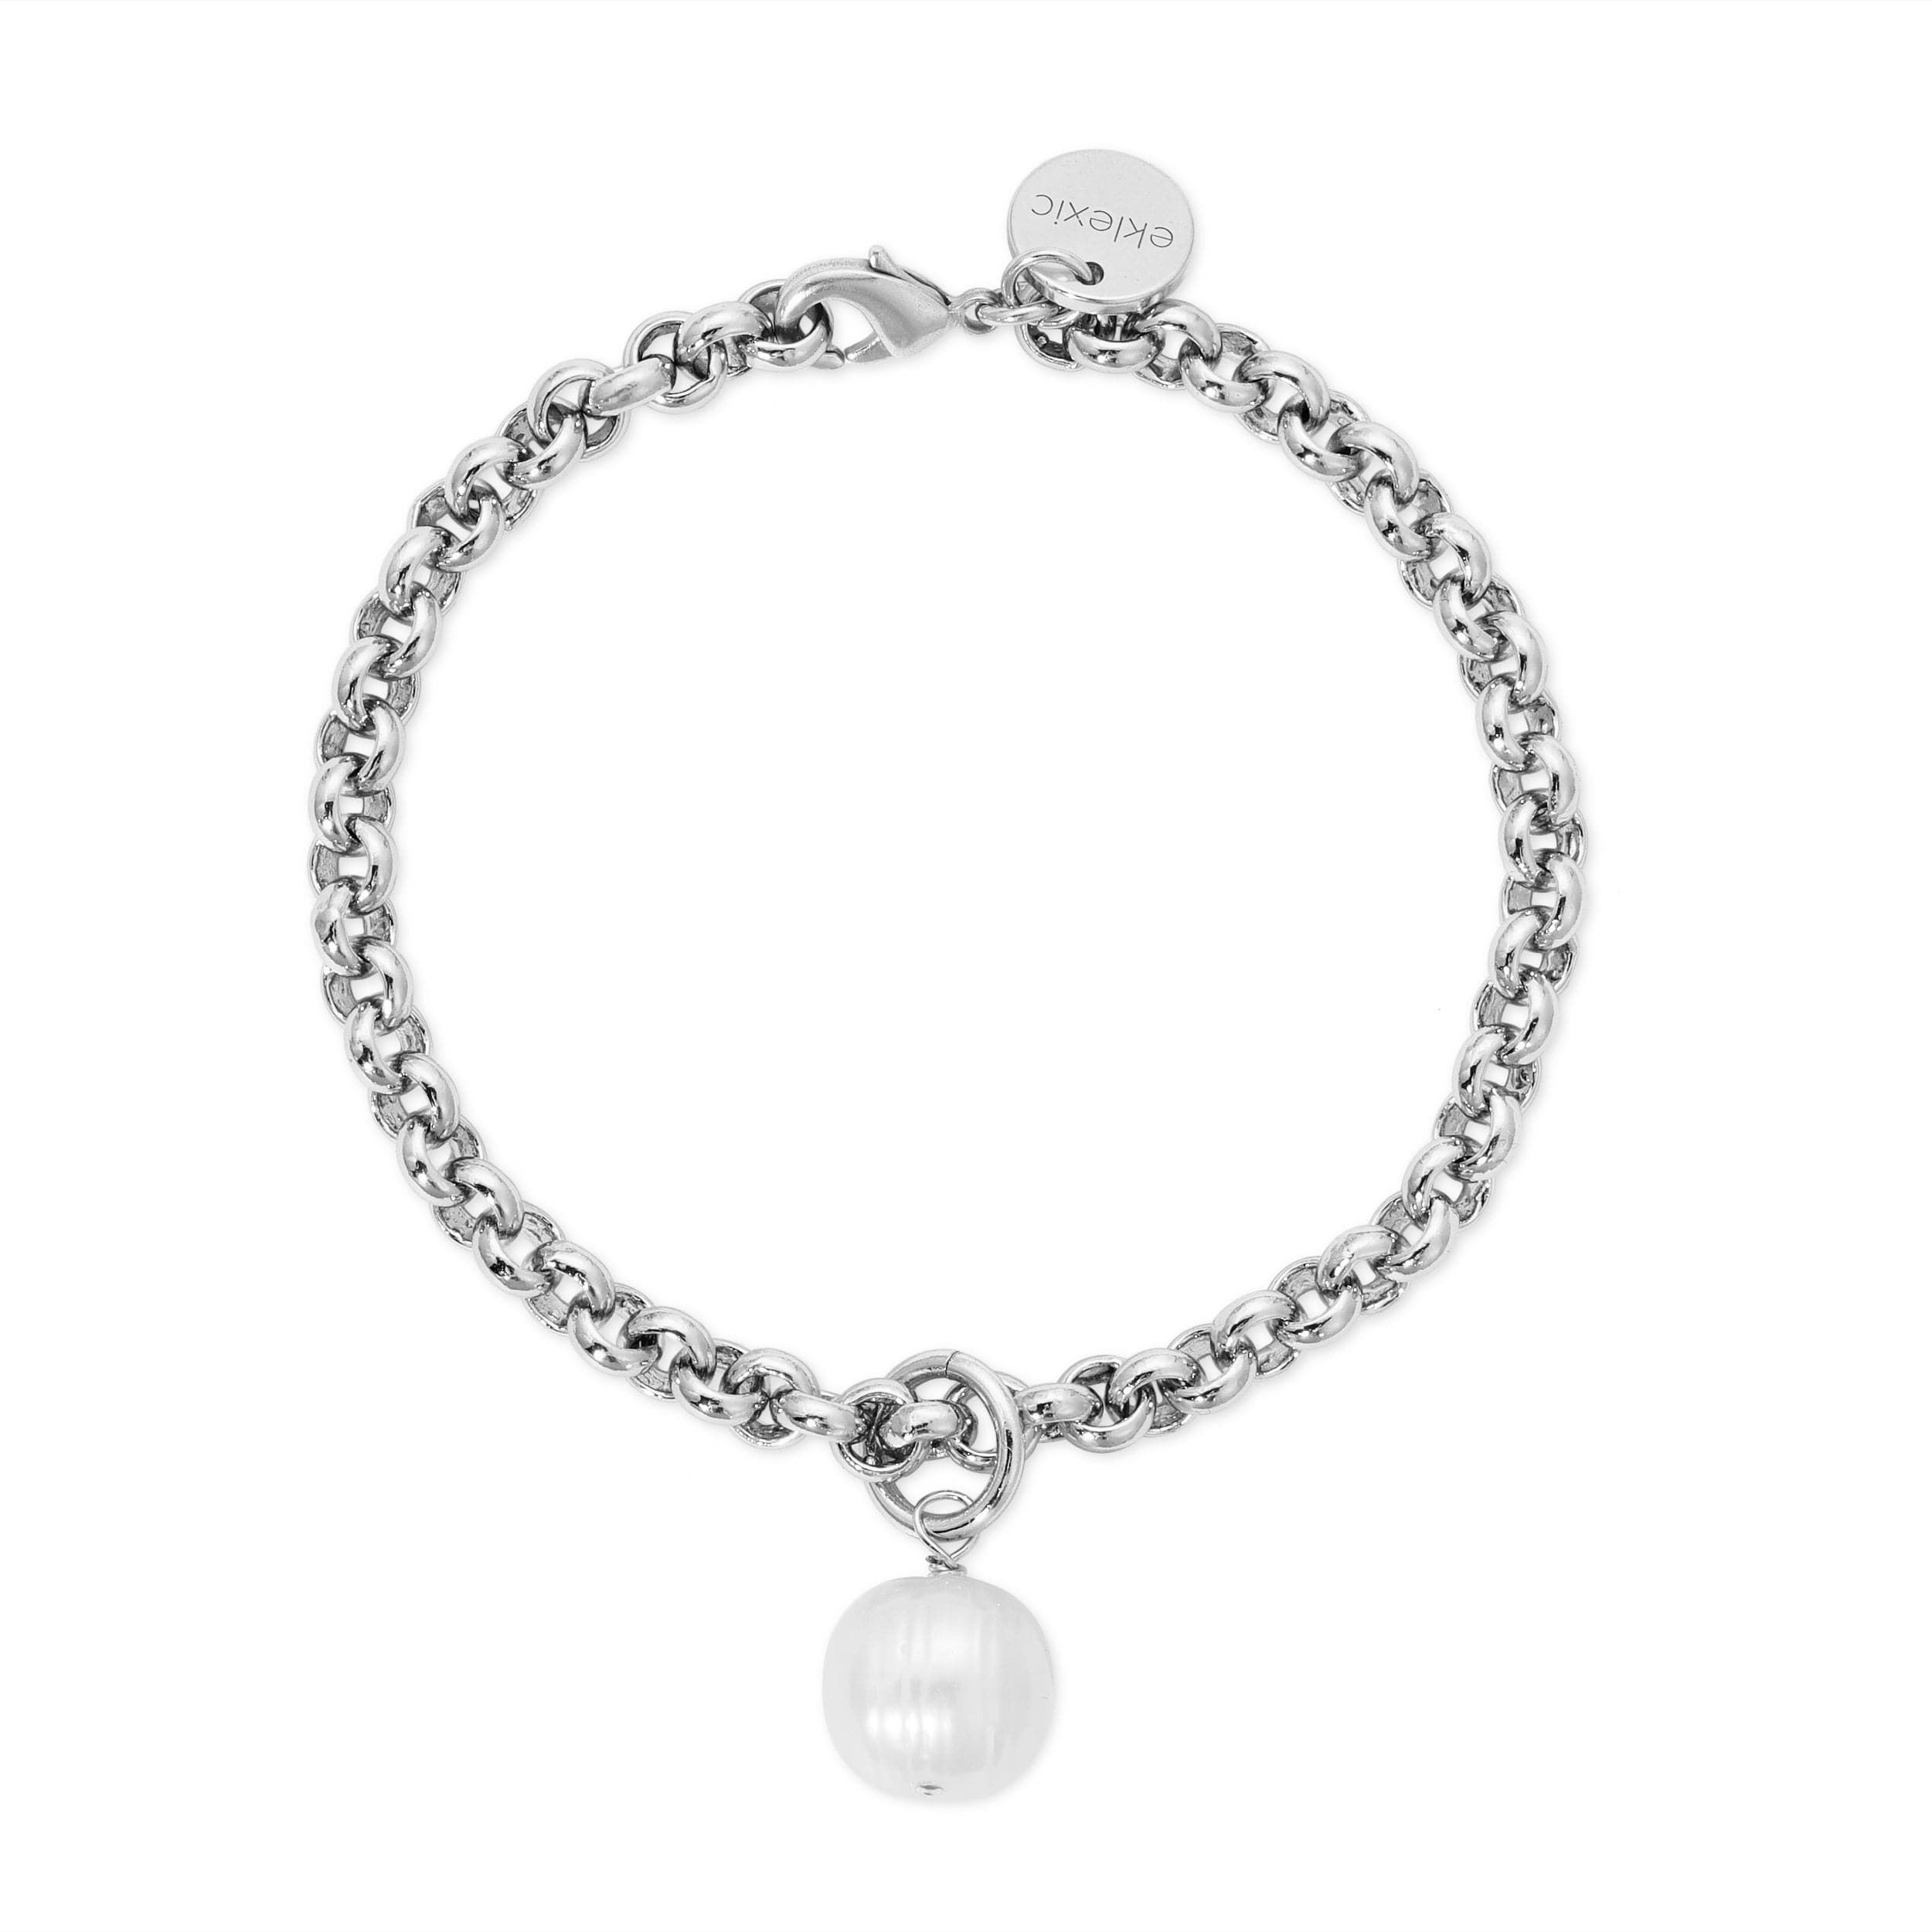 a silver bracelet with a round charm